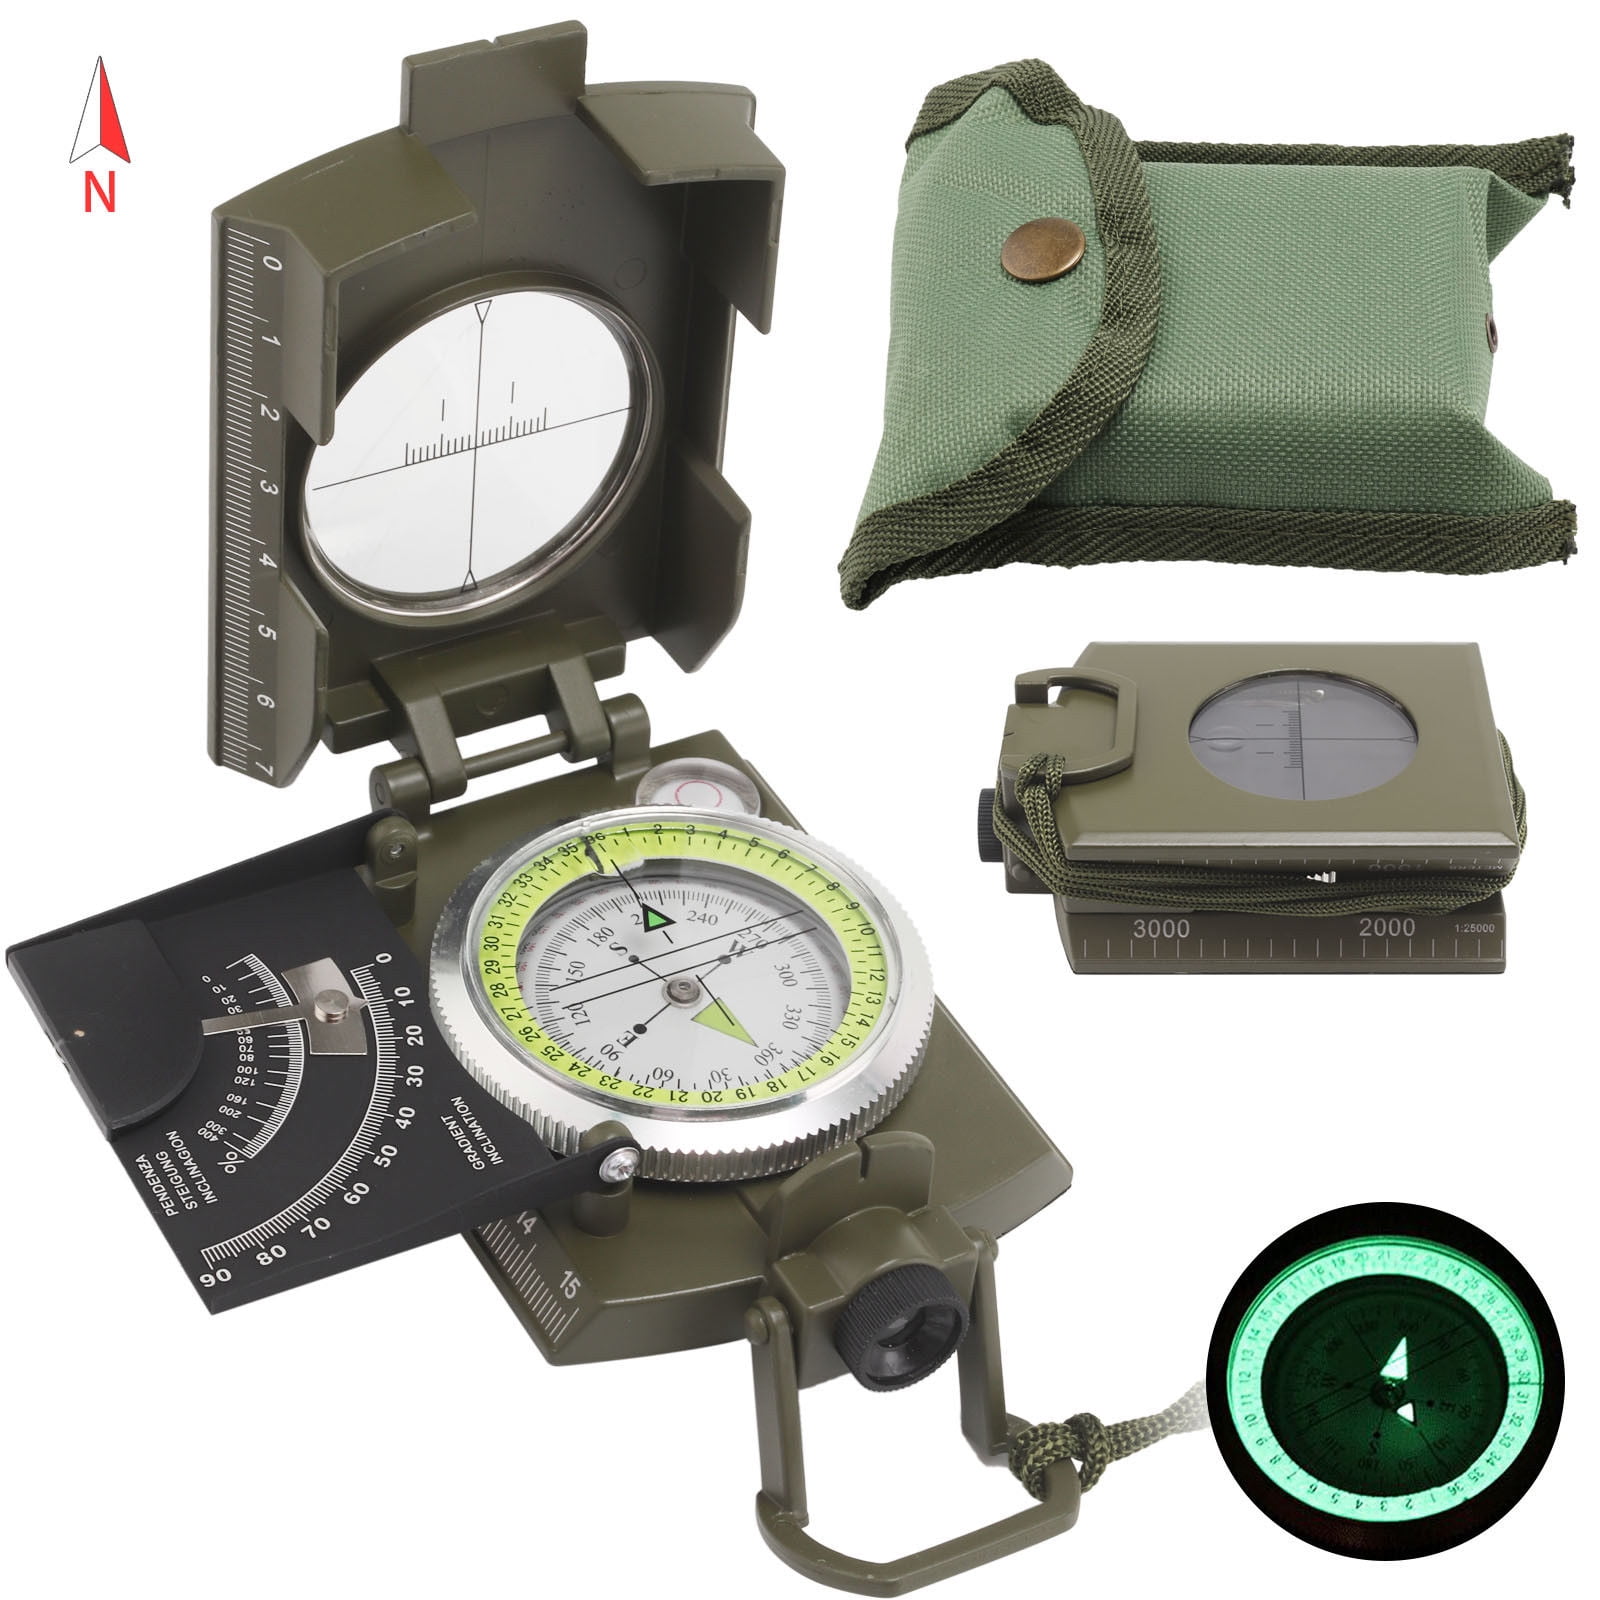 Scouting Posinly Compass Resistant & Waterproof Compass with Sighting，Optic Essential for Hiking Camping 